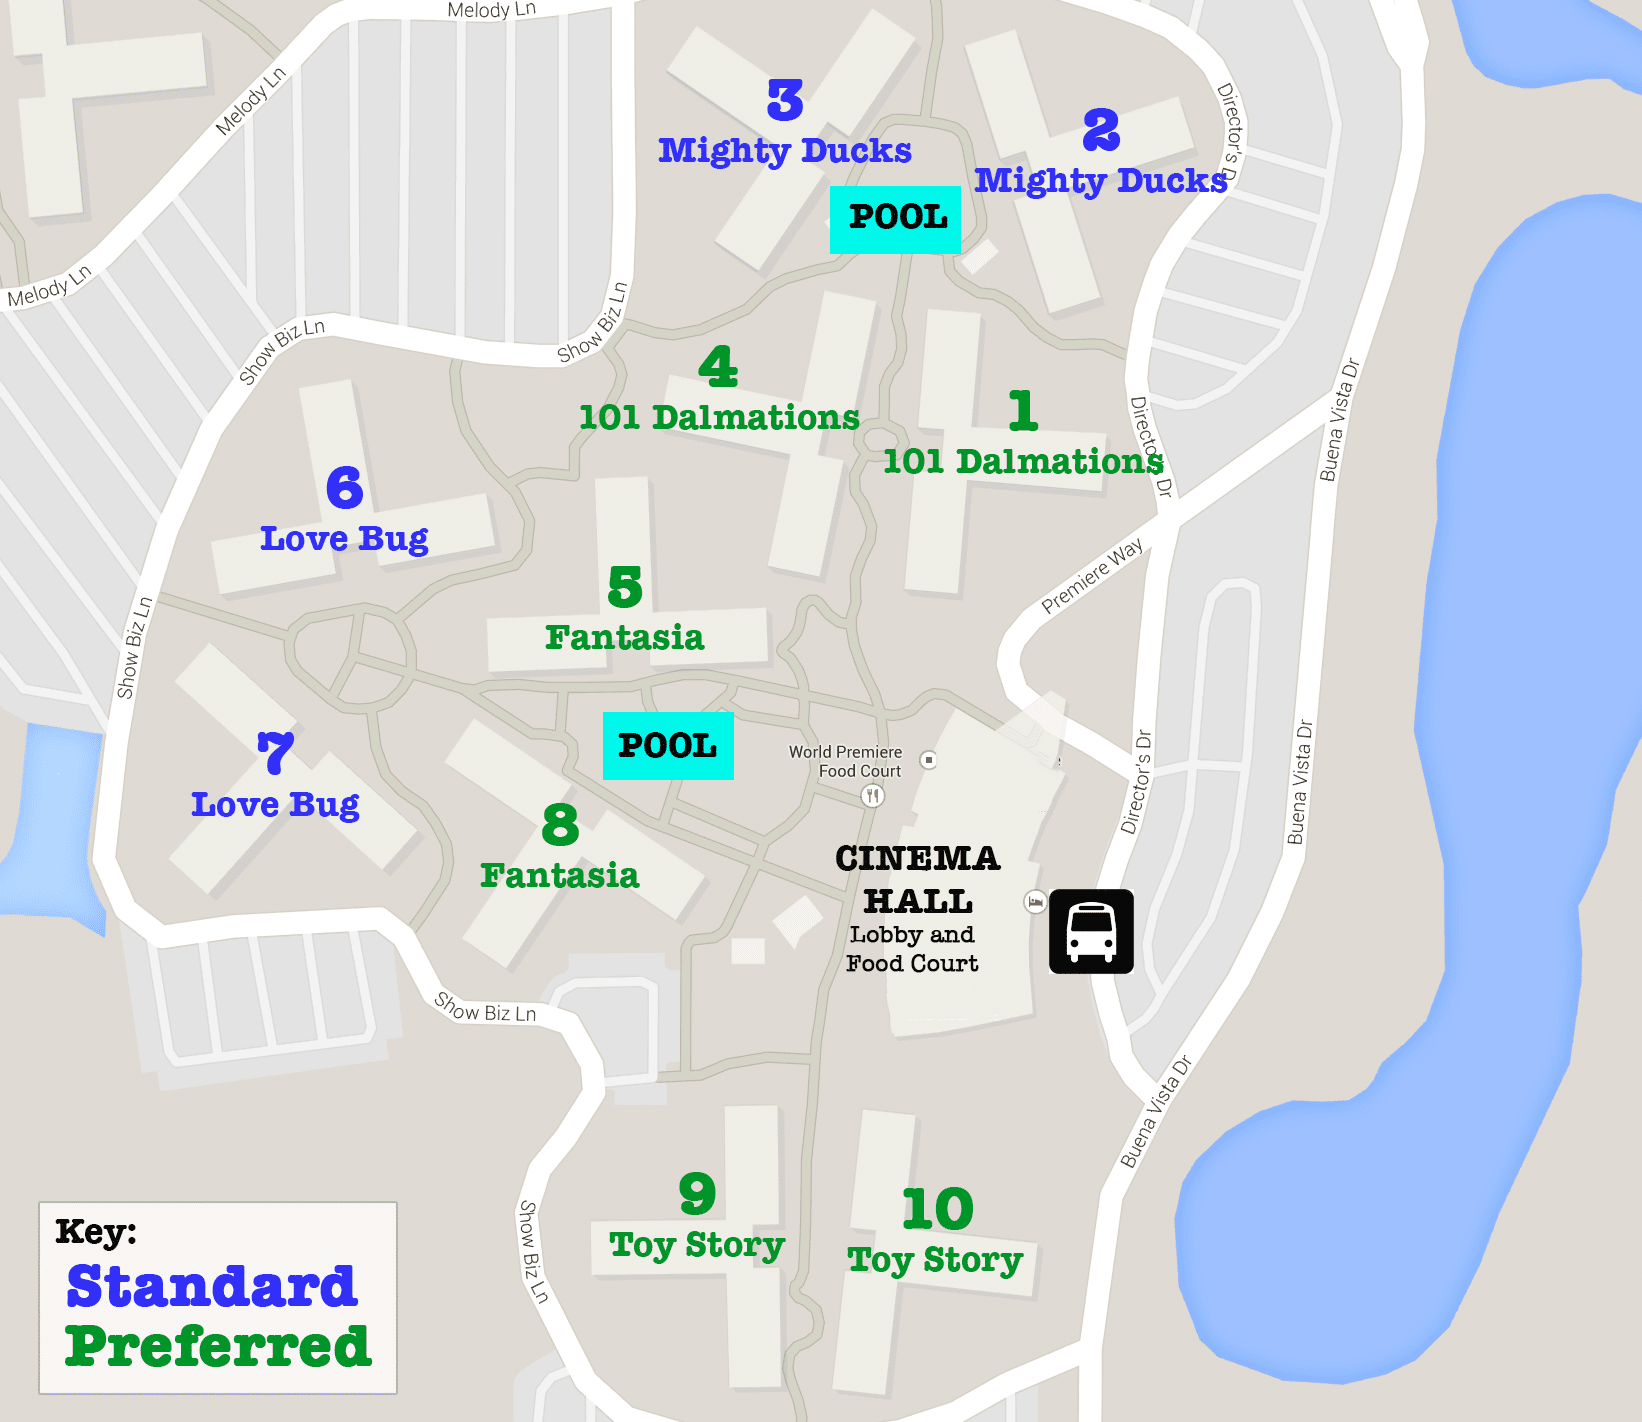 Disneys All-star Movies Resort Map How To Navigate Room Layouts